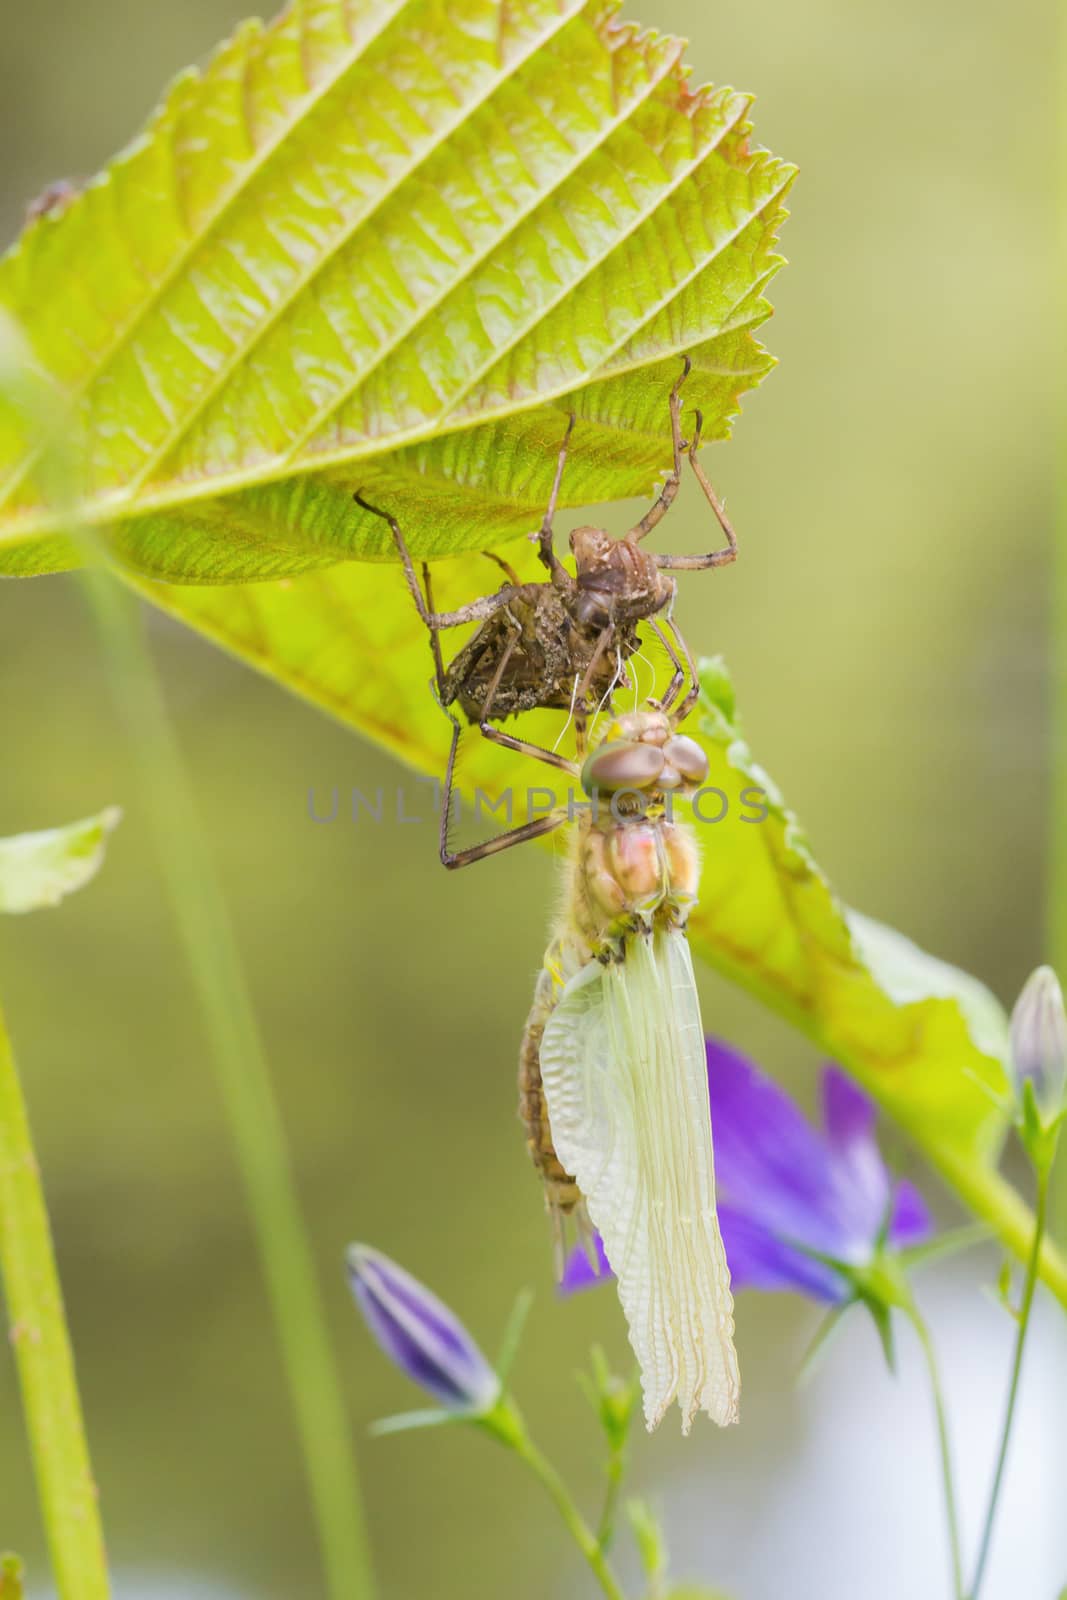 A dragonfly outside in the garden on a leaf by sandra_fotodesign